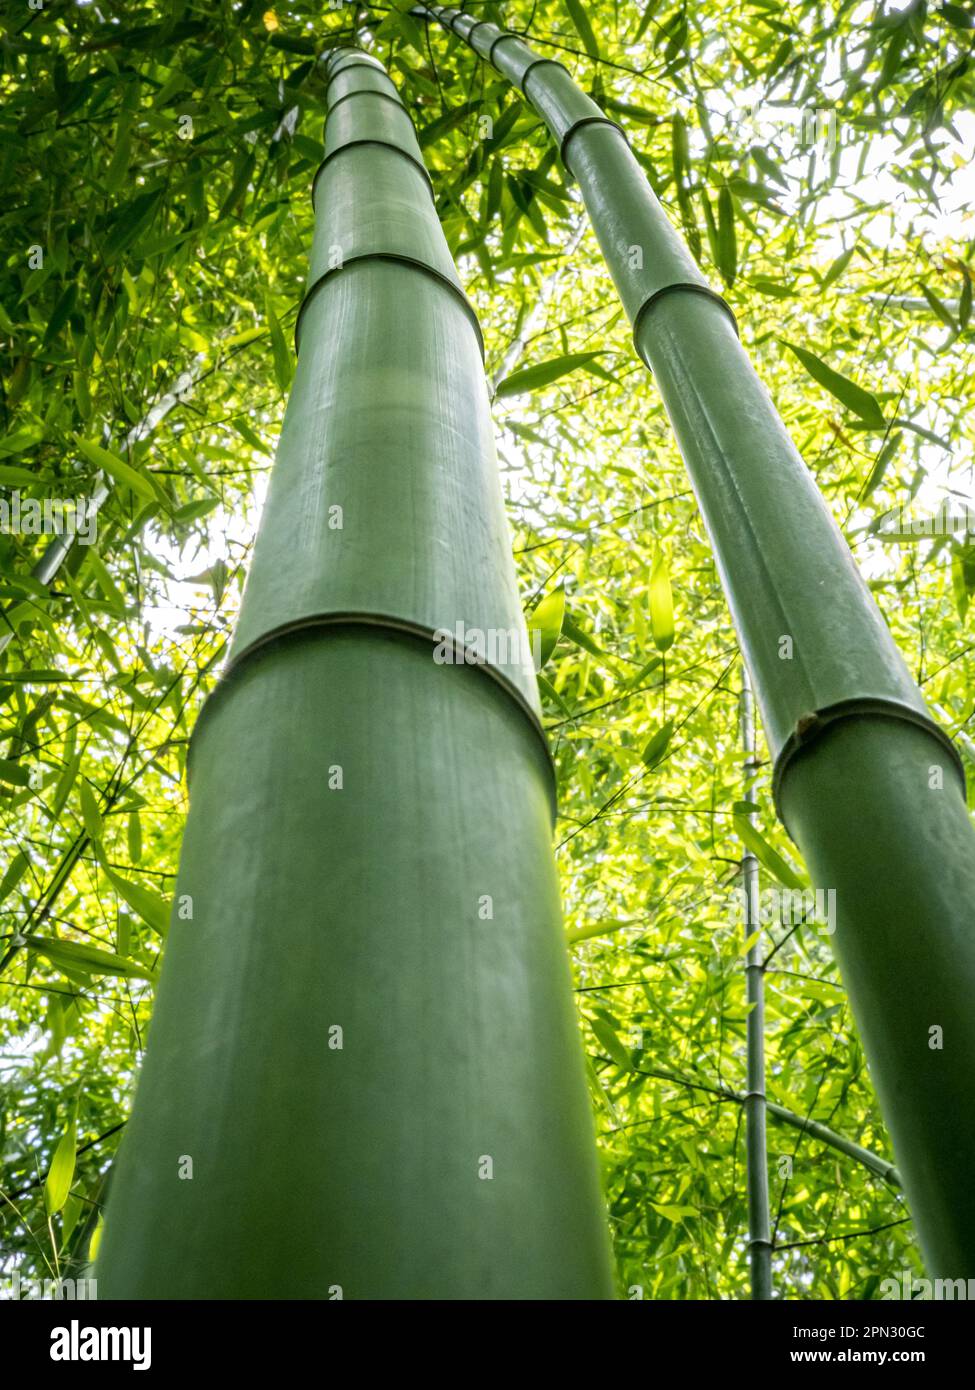 Standing tall, the invasive Phyllostachys viridi-glaucescens bamboo boasts thick and sturdy stems reaching towards the sky in a imposing manner. Stock Photo